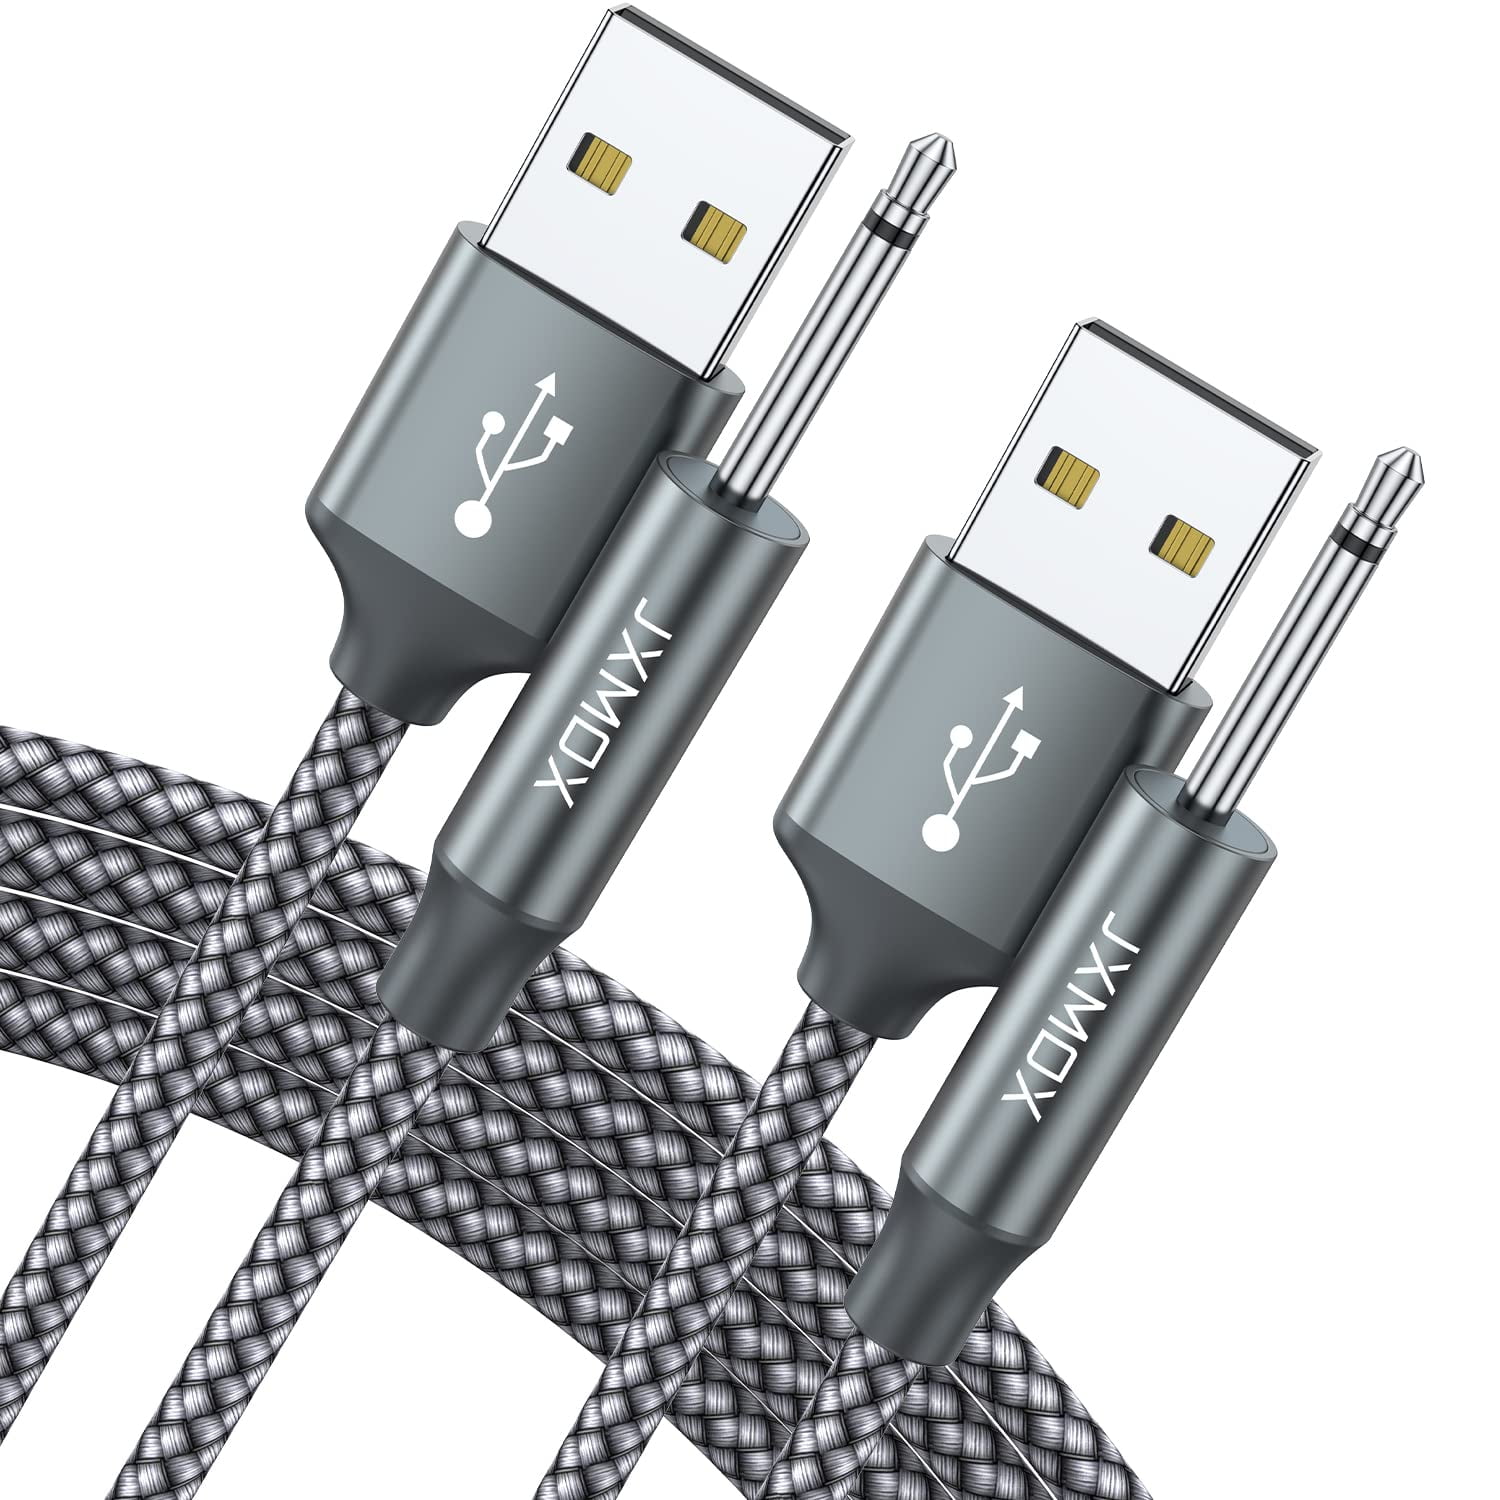 USB Cord (2-Pack 3ft) Replacement Cable (Grey) - Walmart.com